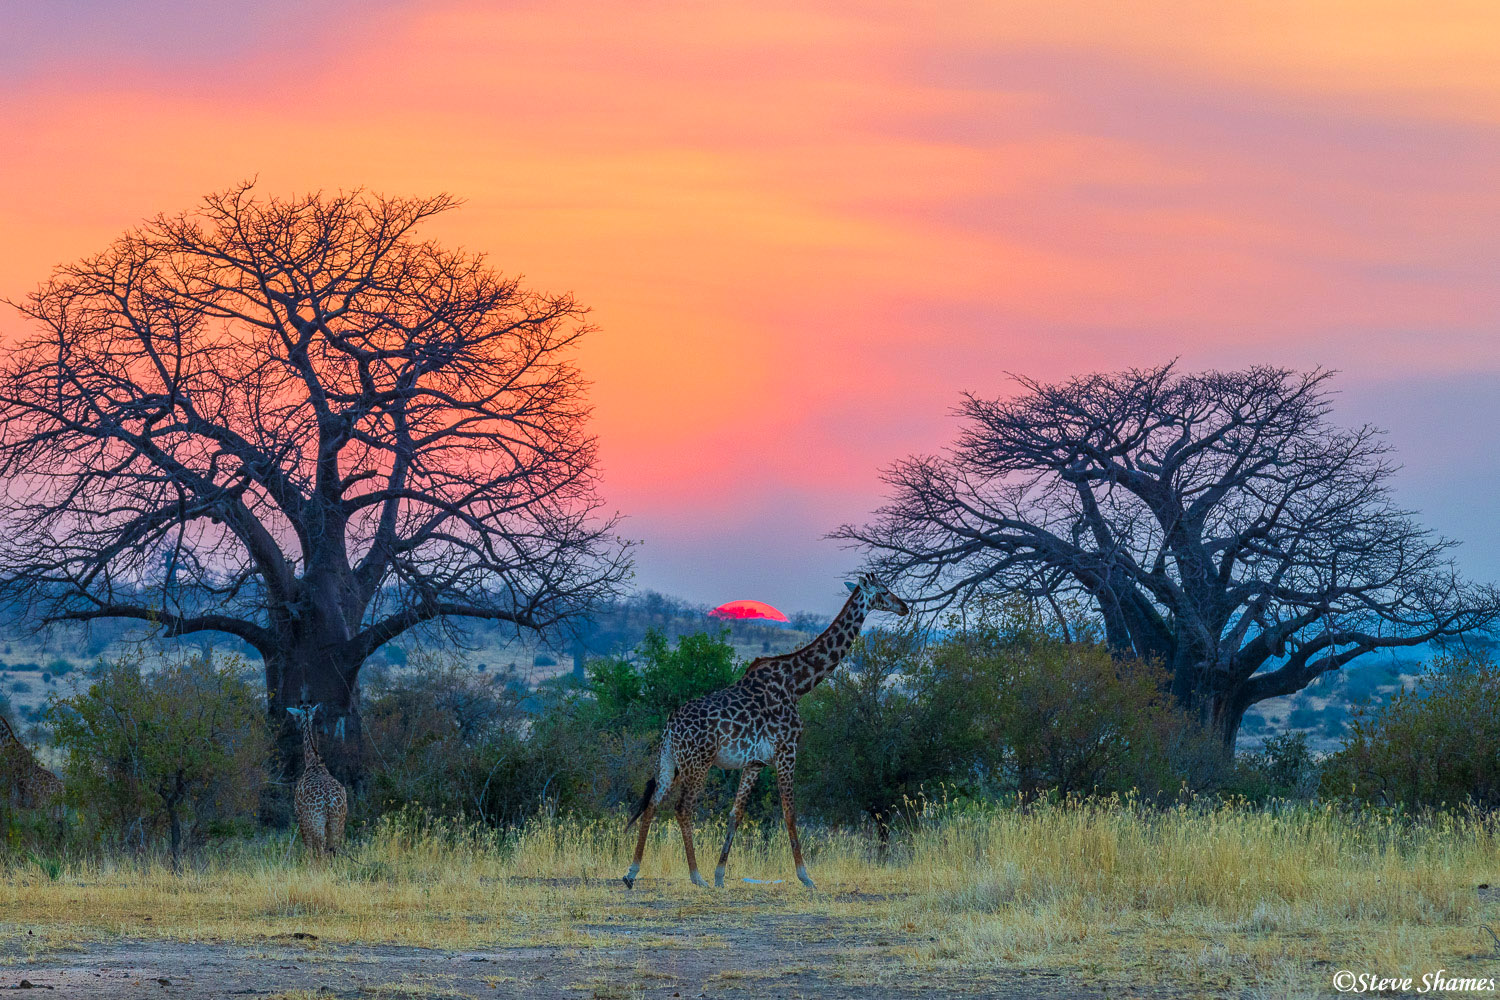 Just when the last slice of the sun was setting between two baobab trees, a giraffe walks by. I thought it added to the scene...